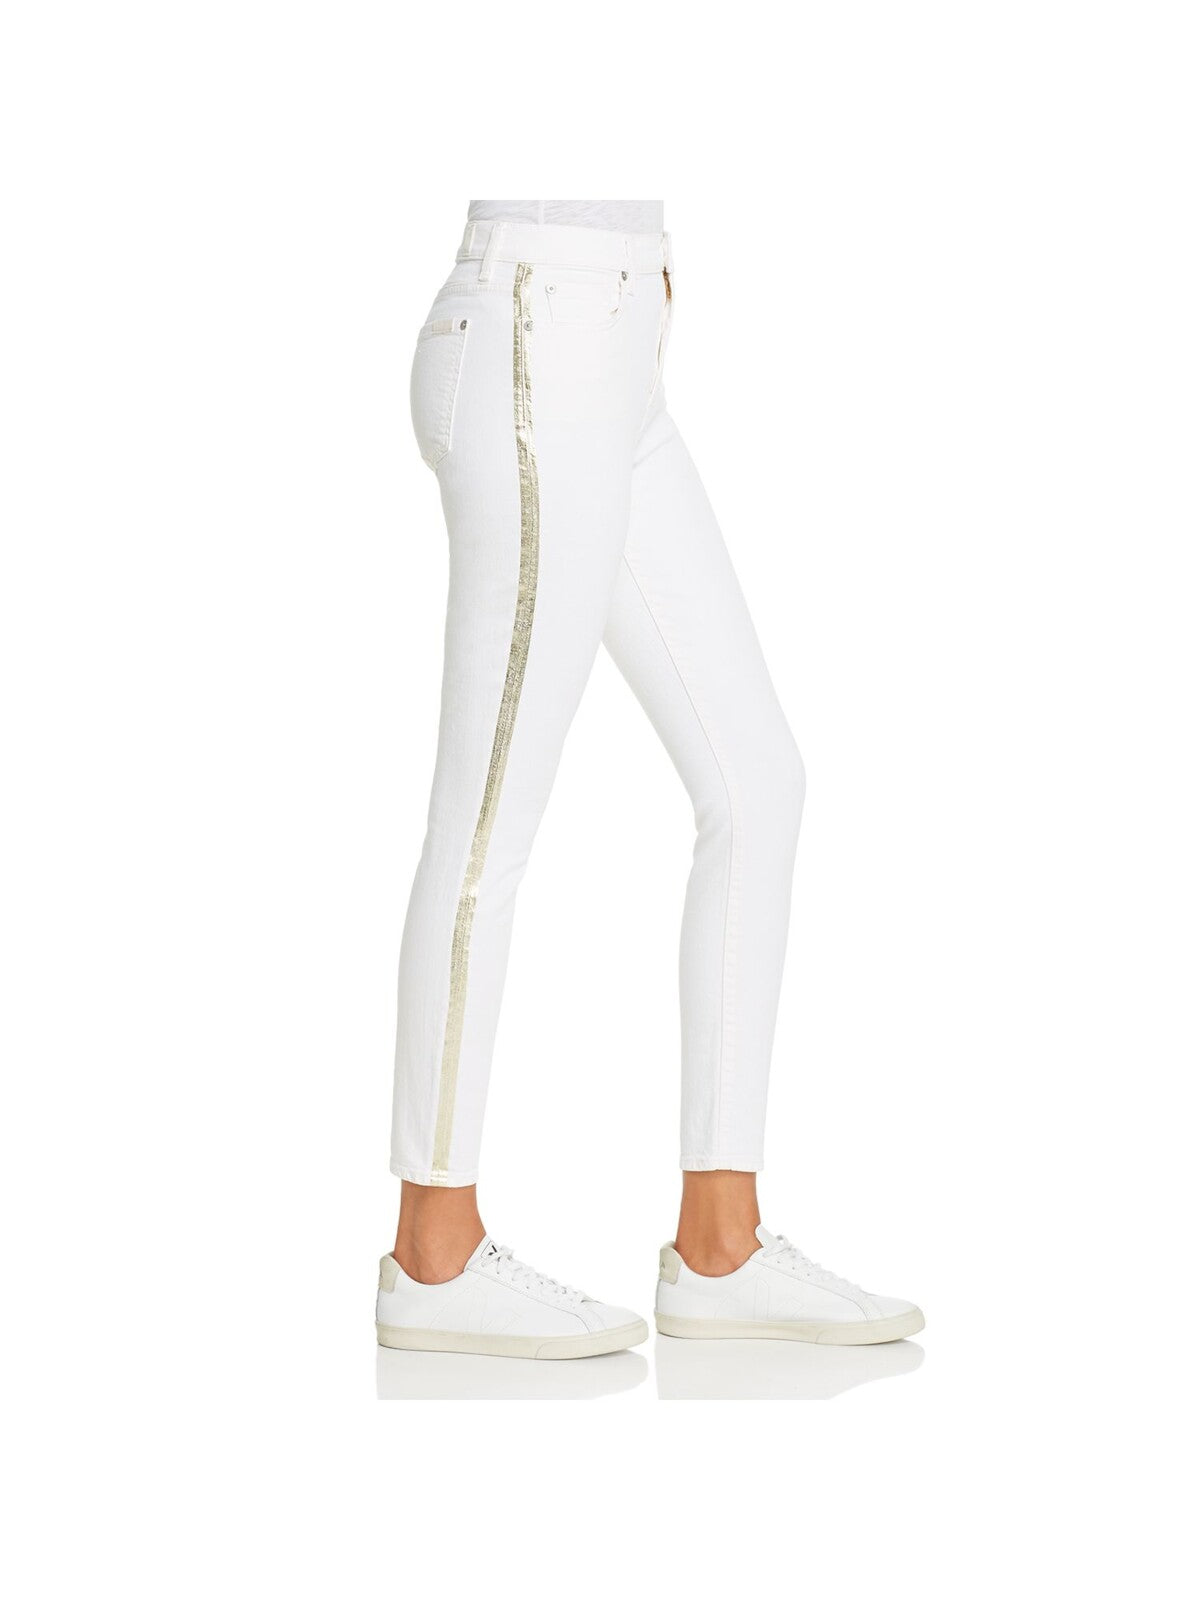 7 FOR ALL MANKIND Womens White Zippered Pocketed Metallic Ankle Skinny High Waist Jeans 32